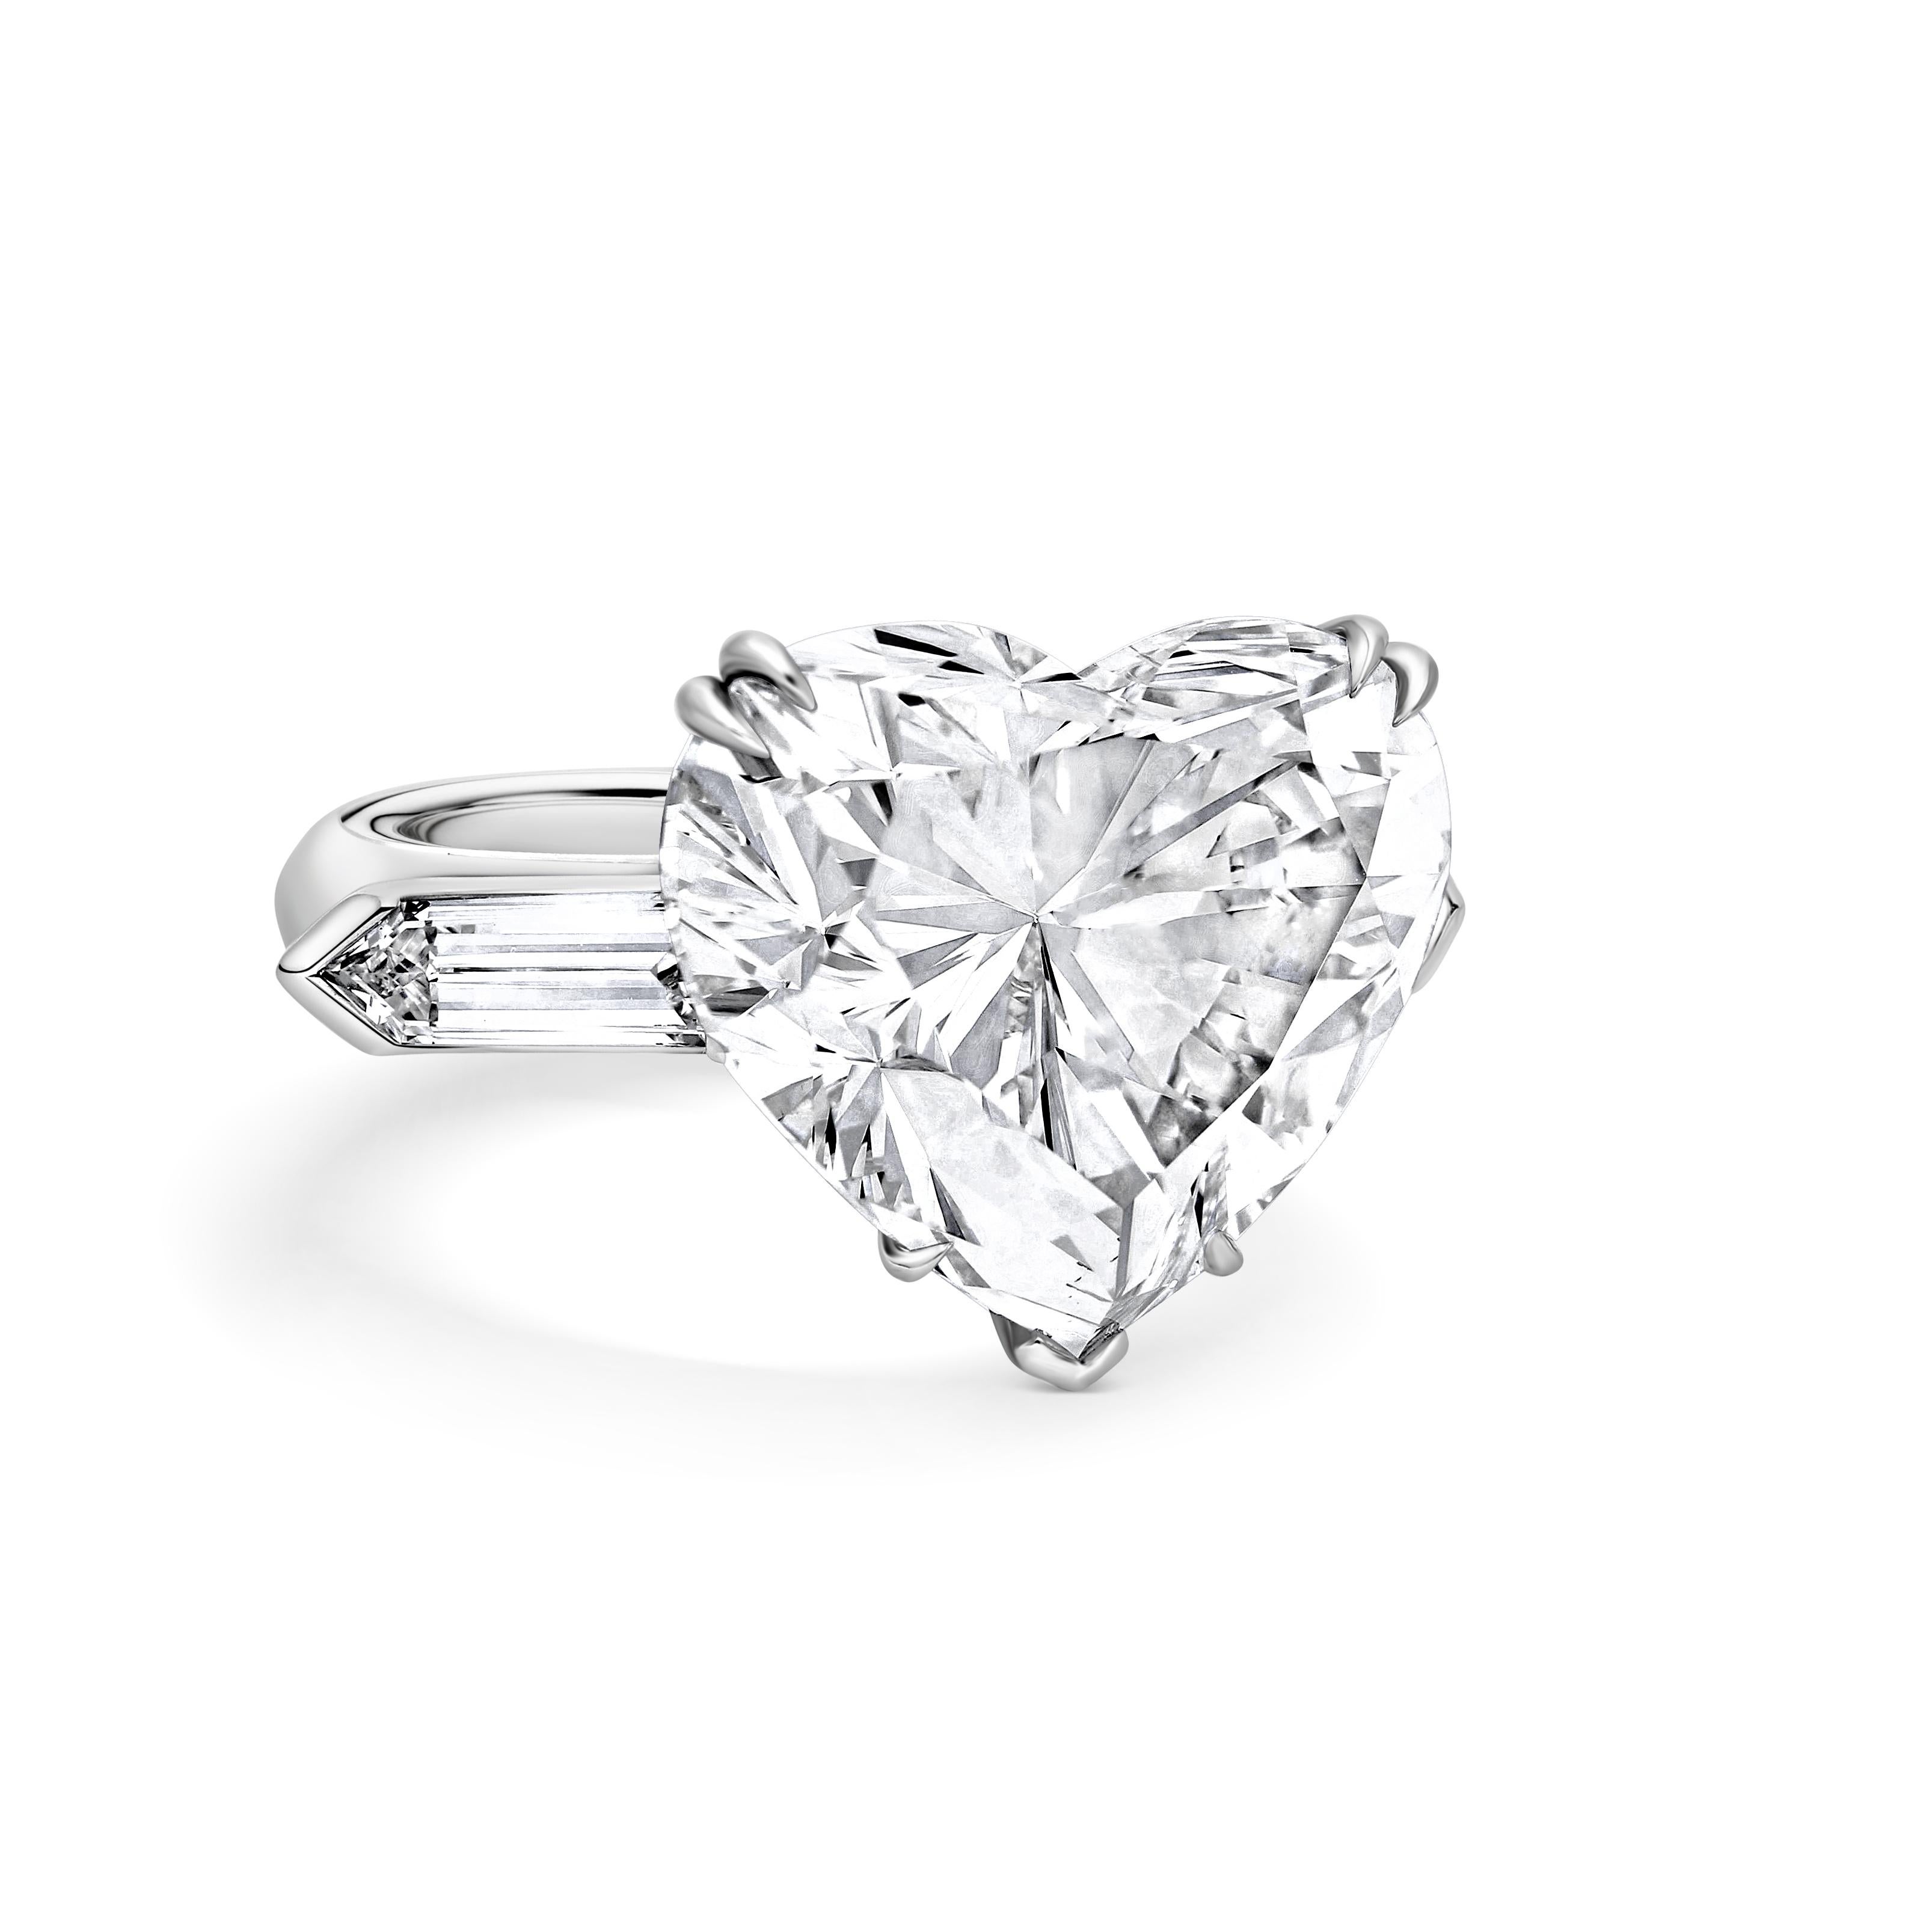 This 18.95 Carat, Internally Flawless Type II-A Heart-Shape Diamond is the archetype of luxury. It embodies the essence of “Miracles of Nature.” That such beauty can be found in the greatest depths of our Mother Earth is what inspires us all.

Set